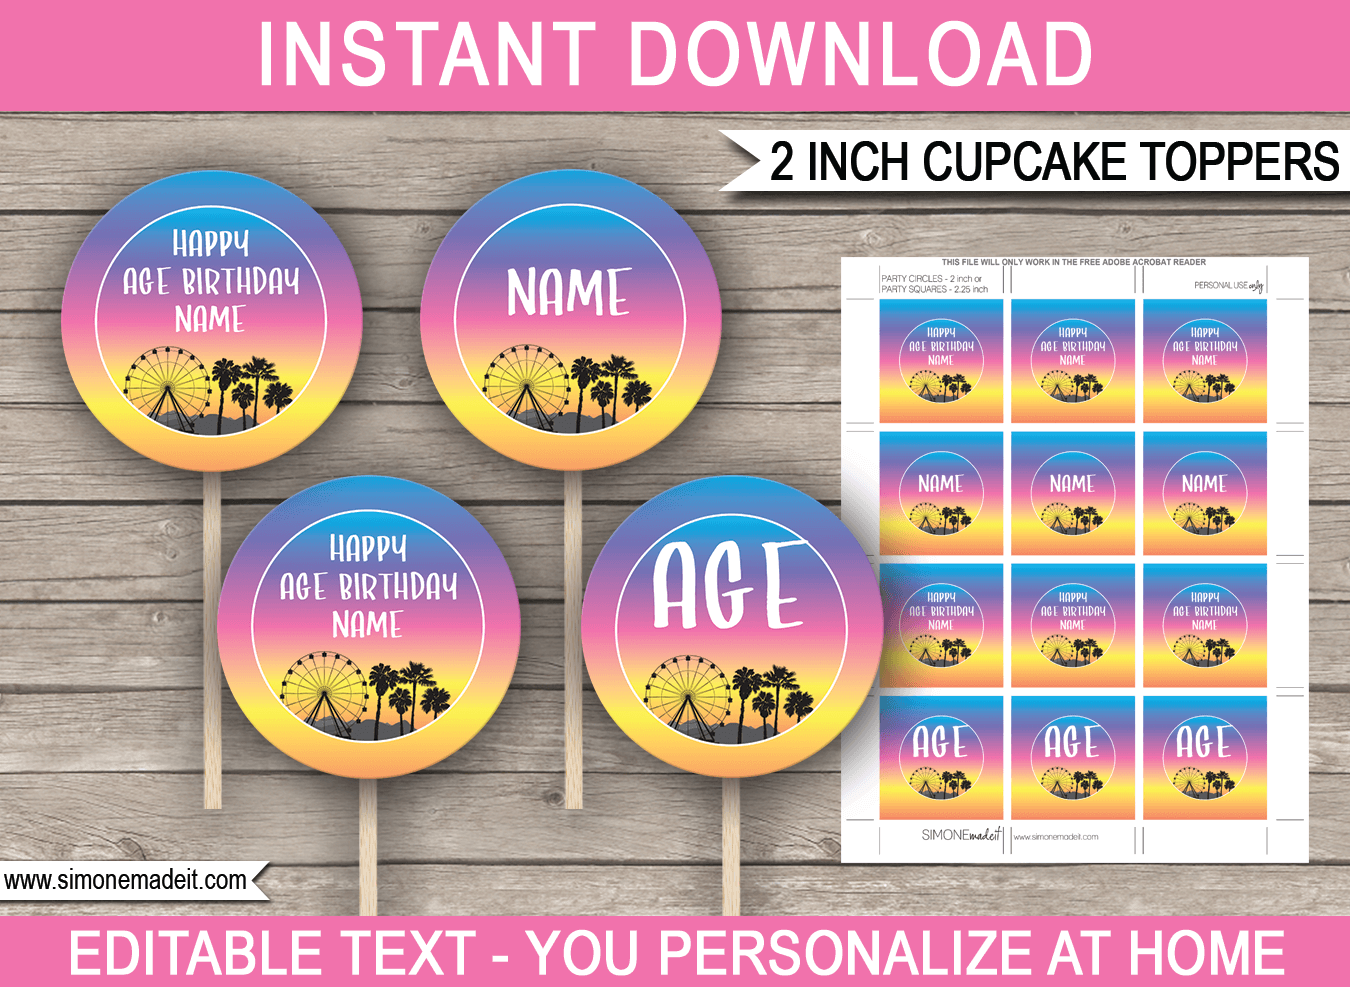 Printable Festival Party Cupcake Toppers | 2 inch | Festival Theme Birthday Party | Gala, Fete, Fair, Carnival | DIY Editable Template | INSTANT DOWNLOAD via simonemadeit.com